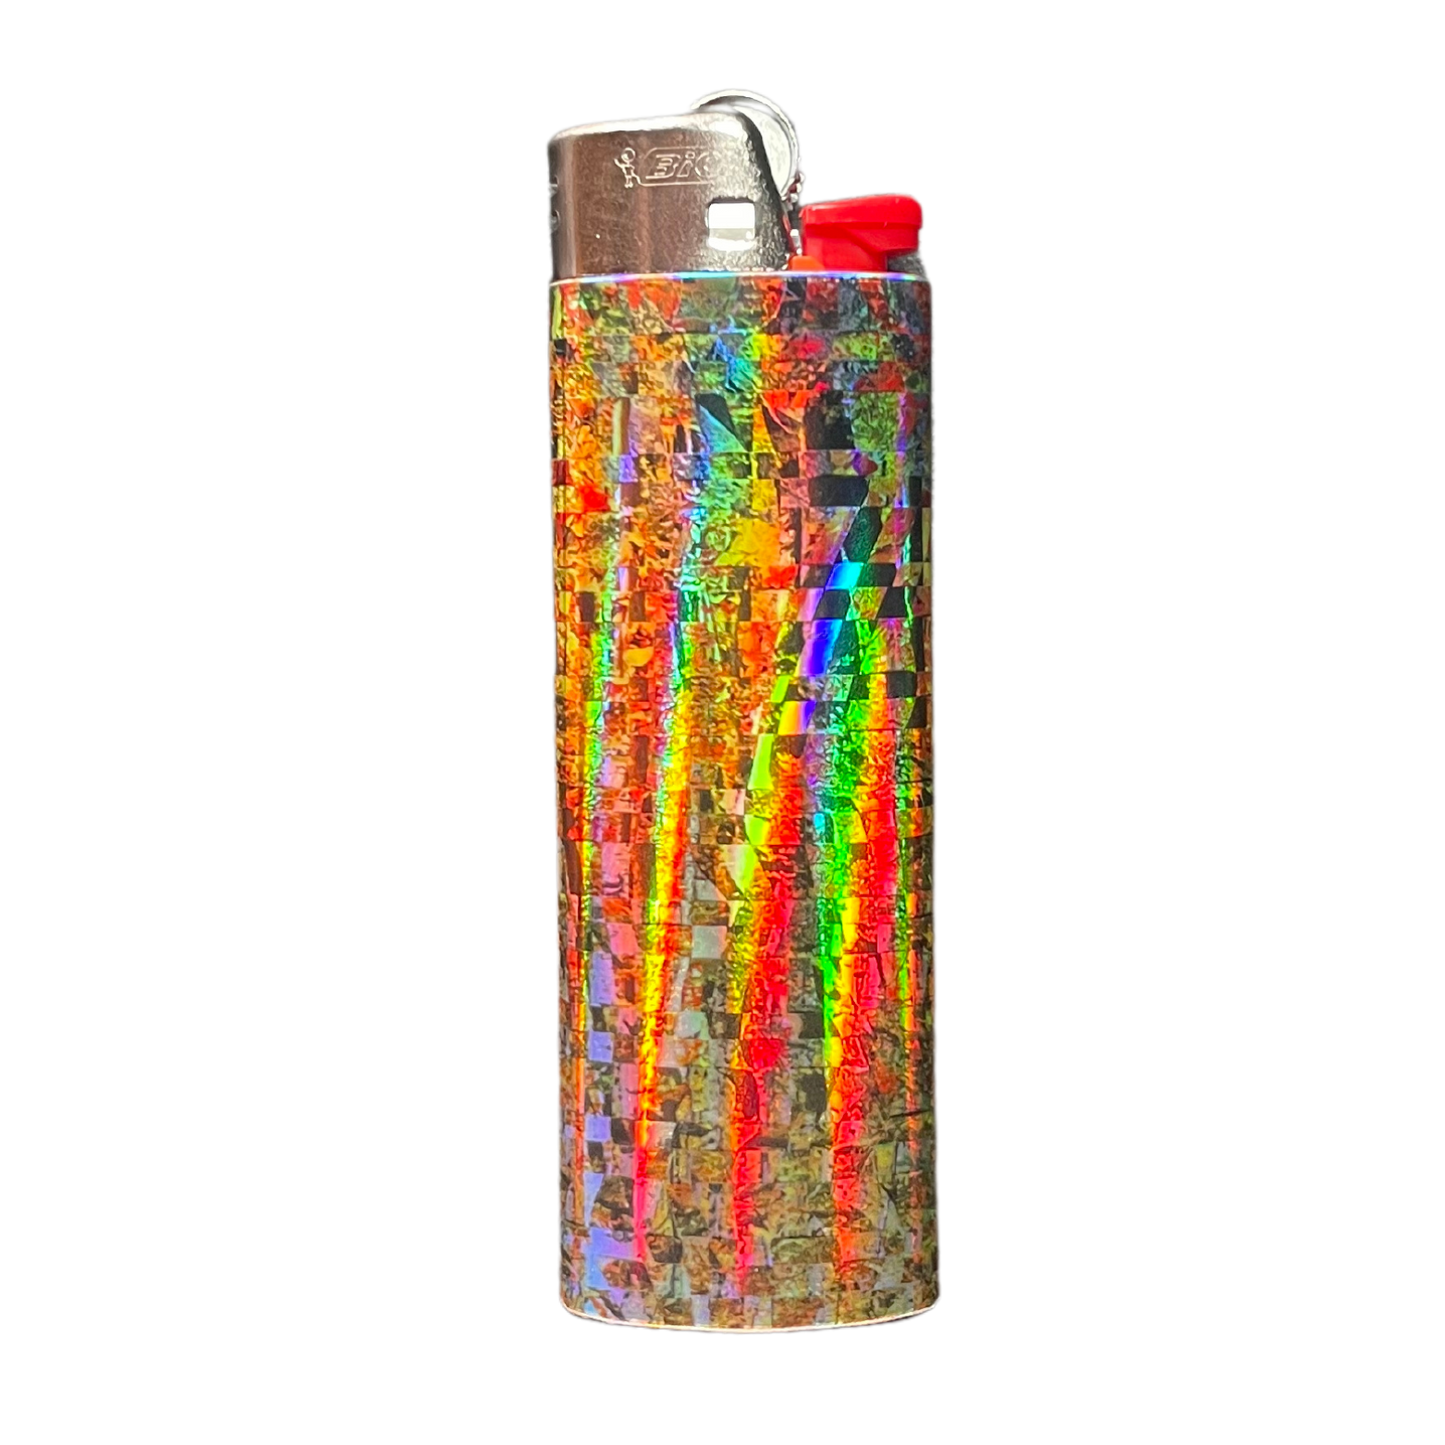 SWEATER WEATHER HOLO LIGHTER